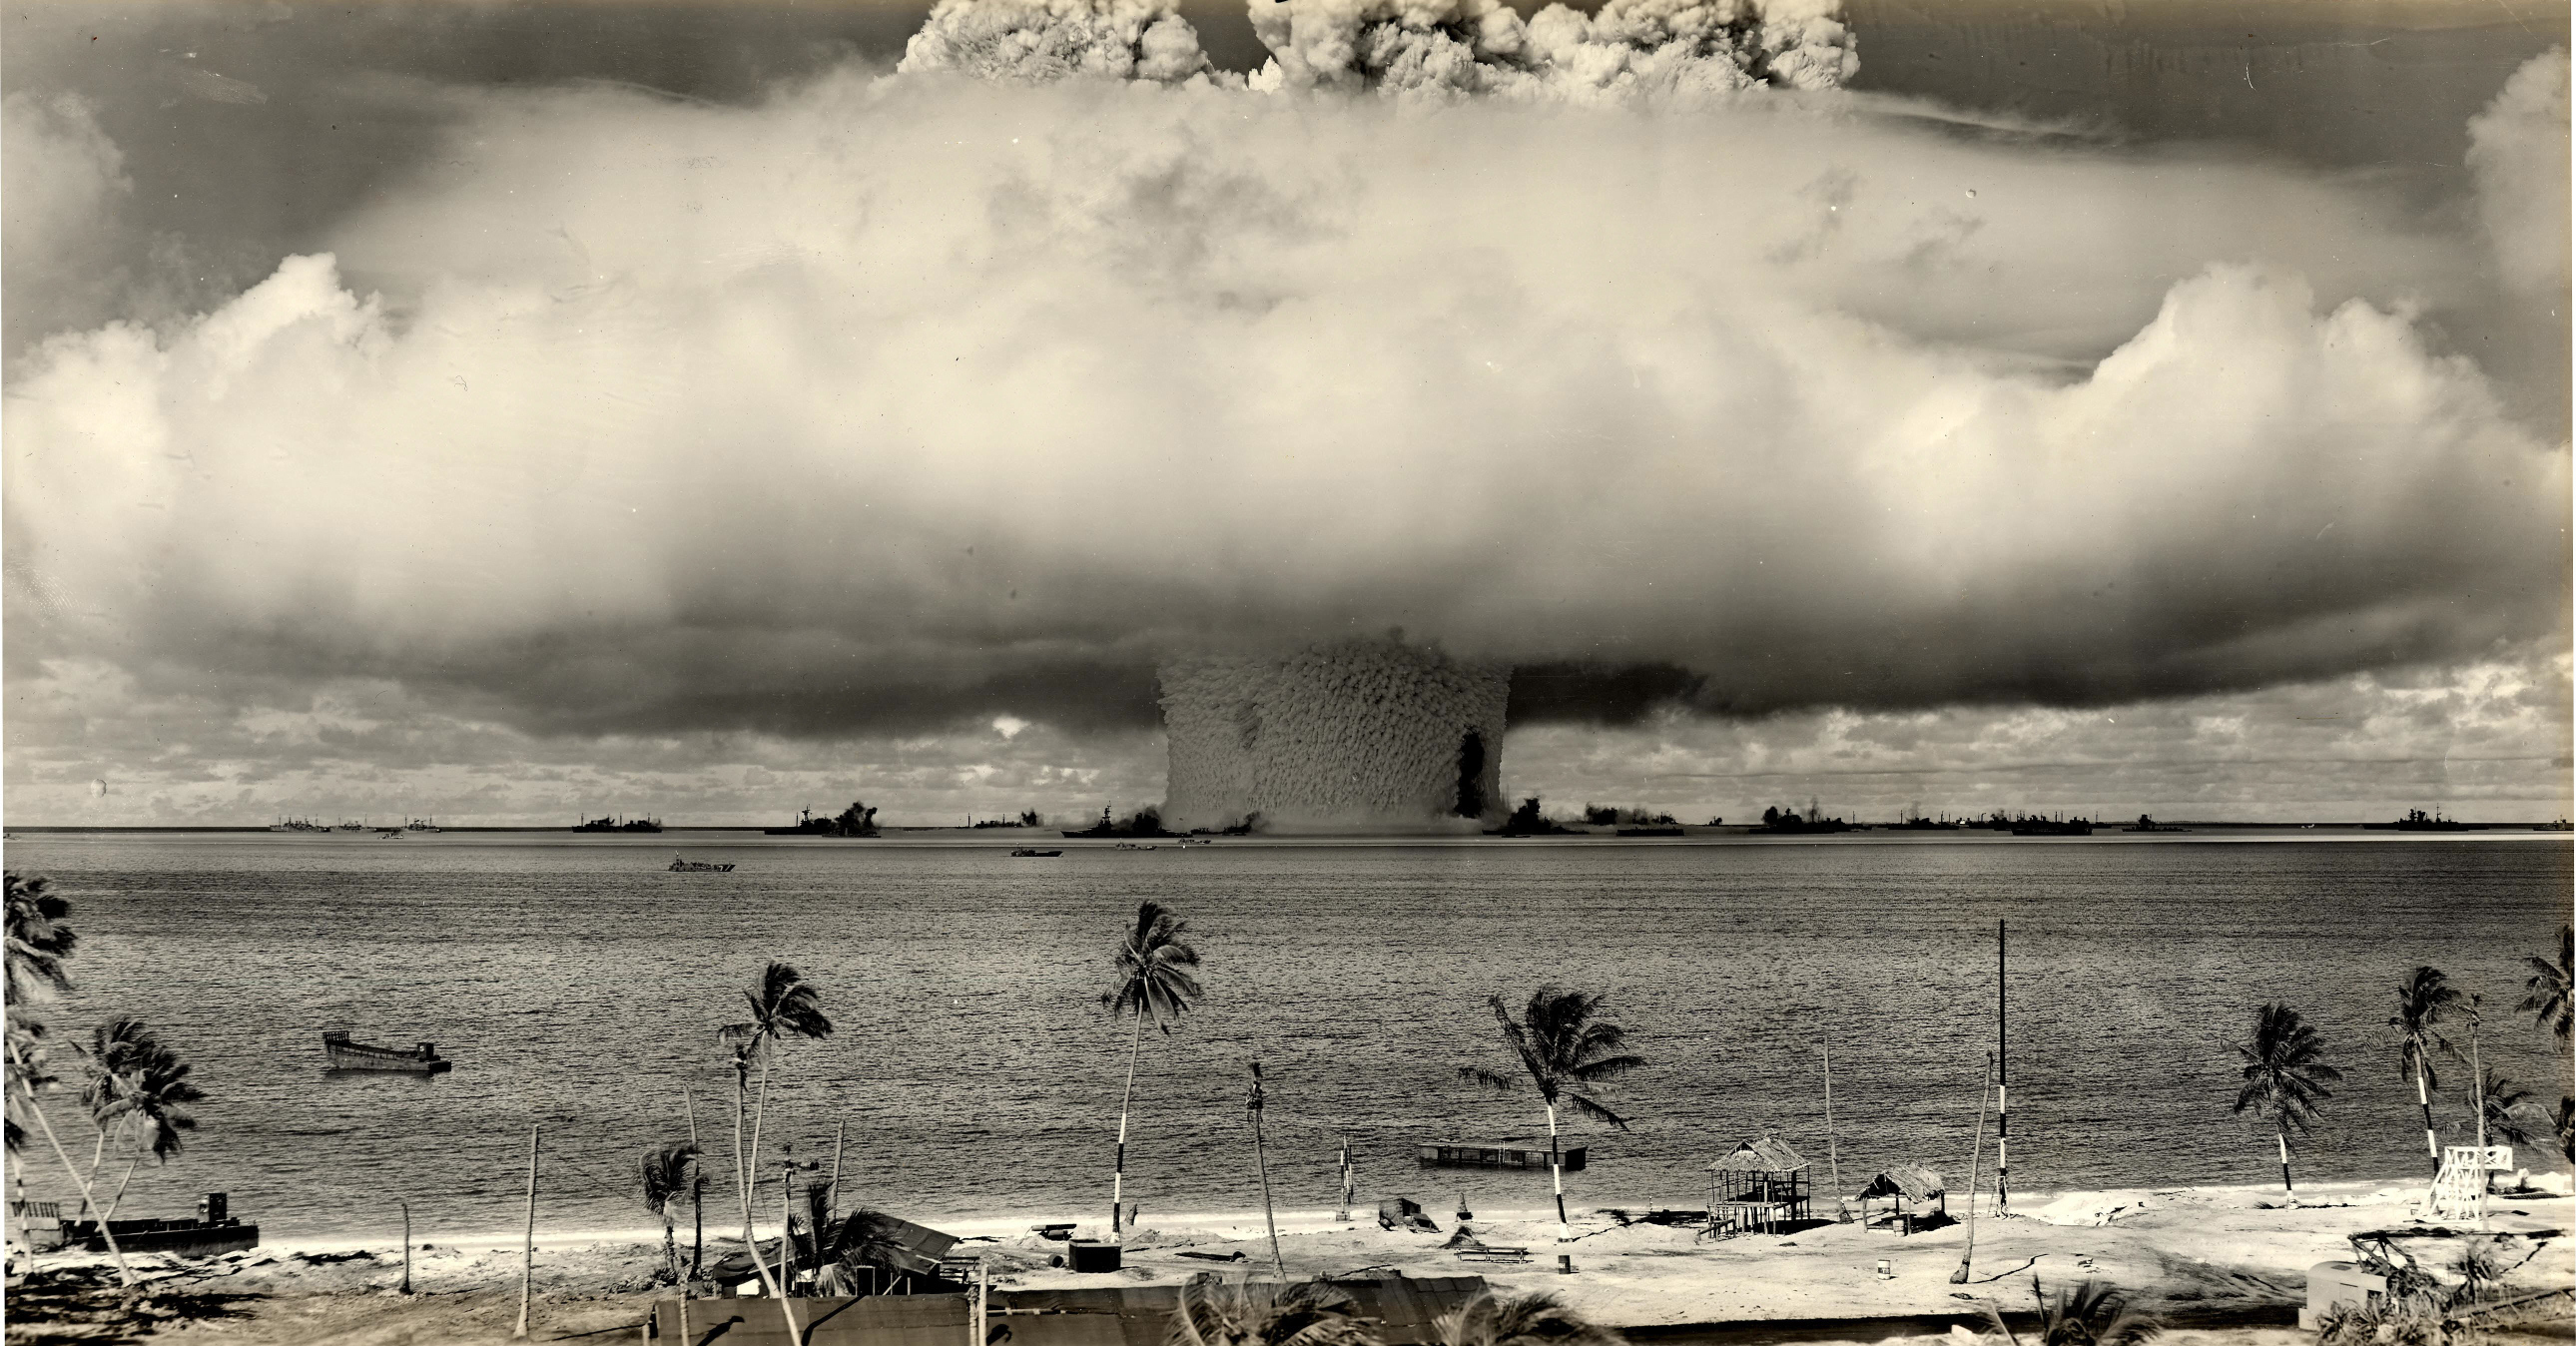 A black and white photo of an atomic bomb going off, published to: 